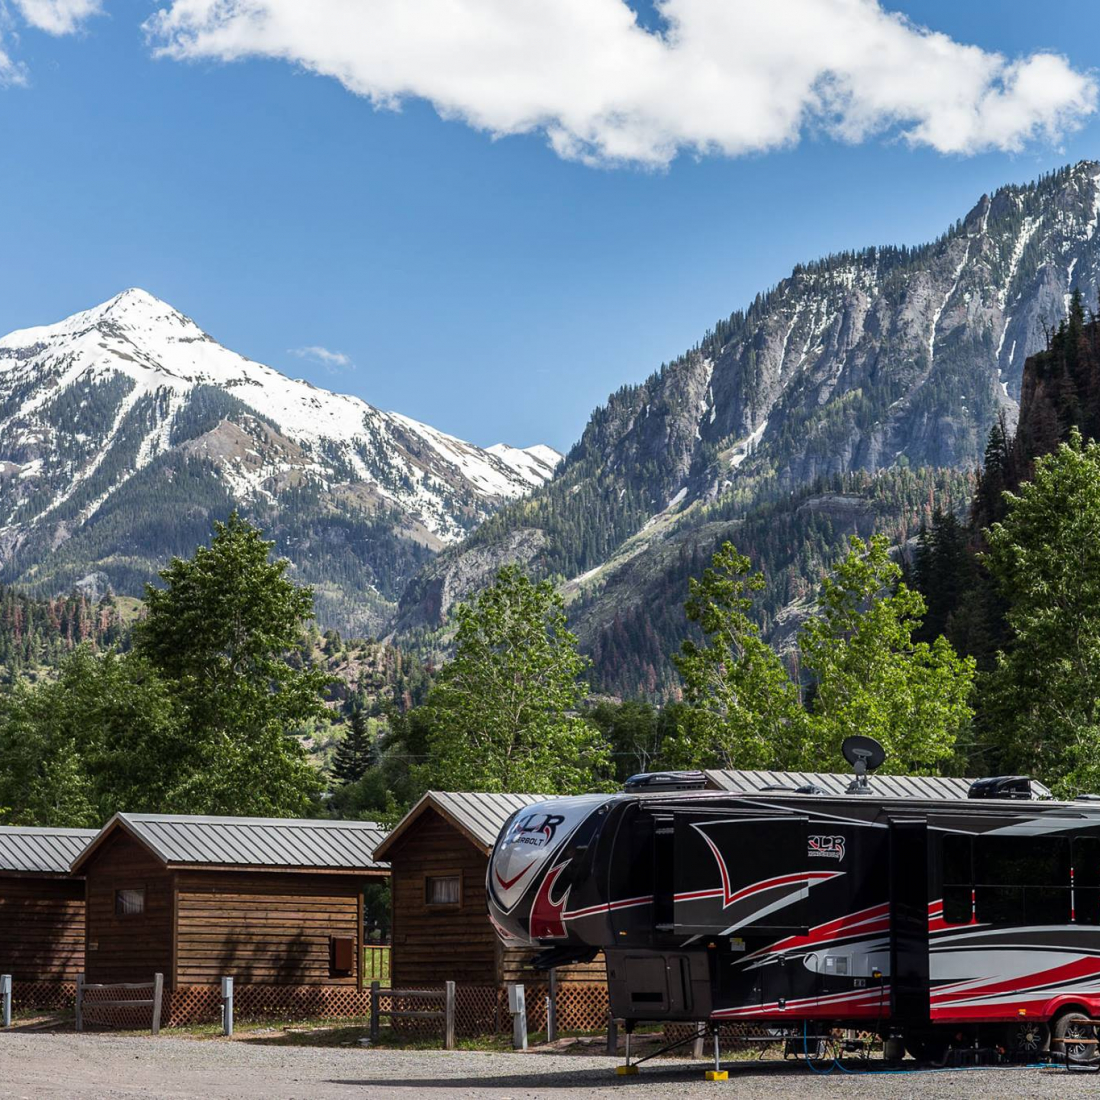 Colorado RV Parks That Are Open Year Round For Camping